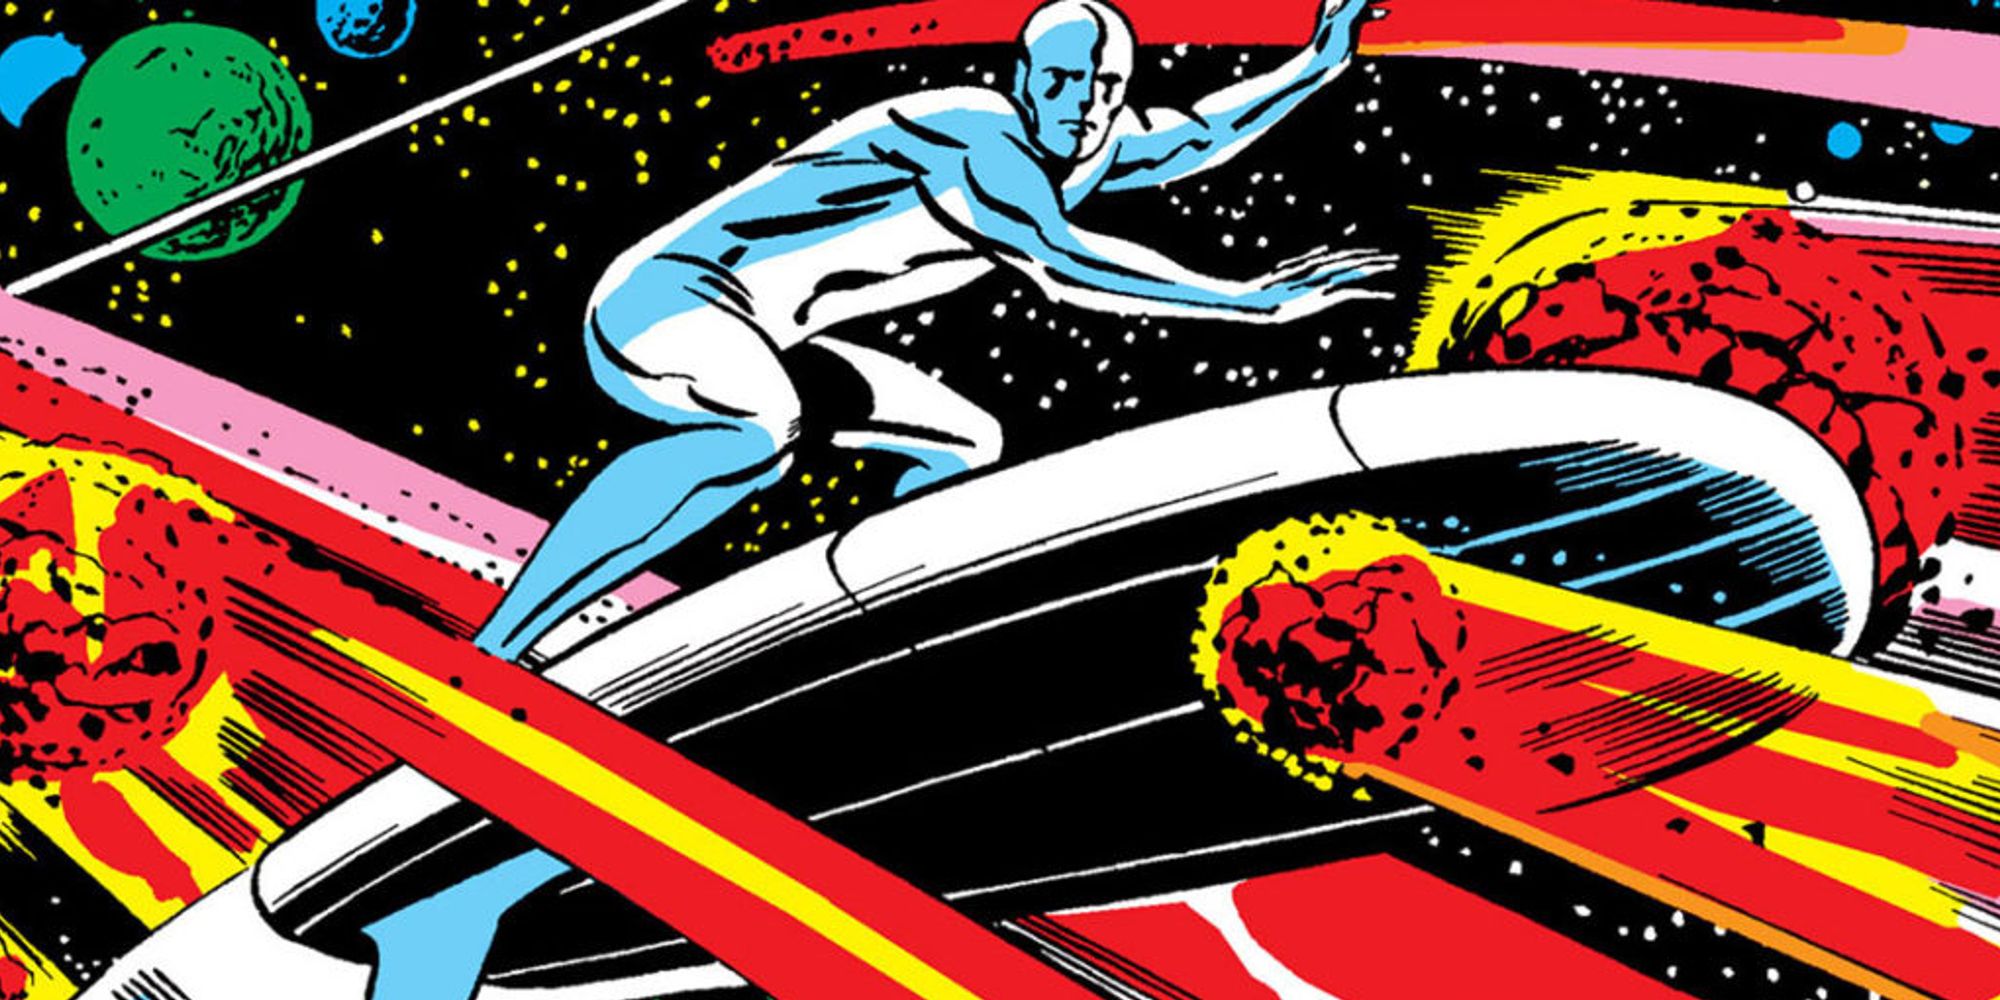 First appearance of the Silver Surfer in Fantastic Four #48